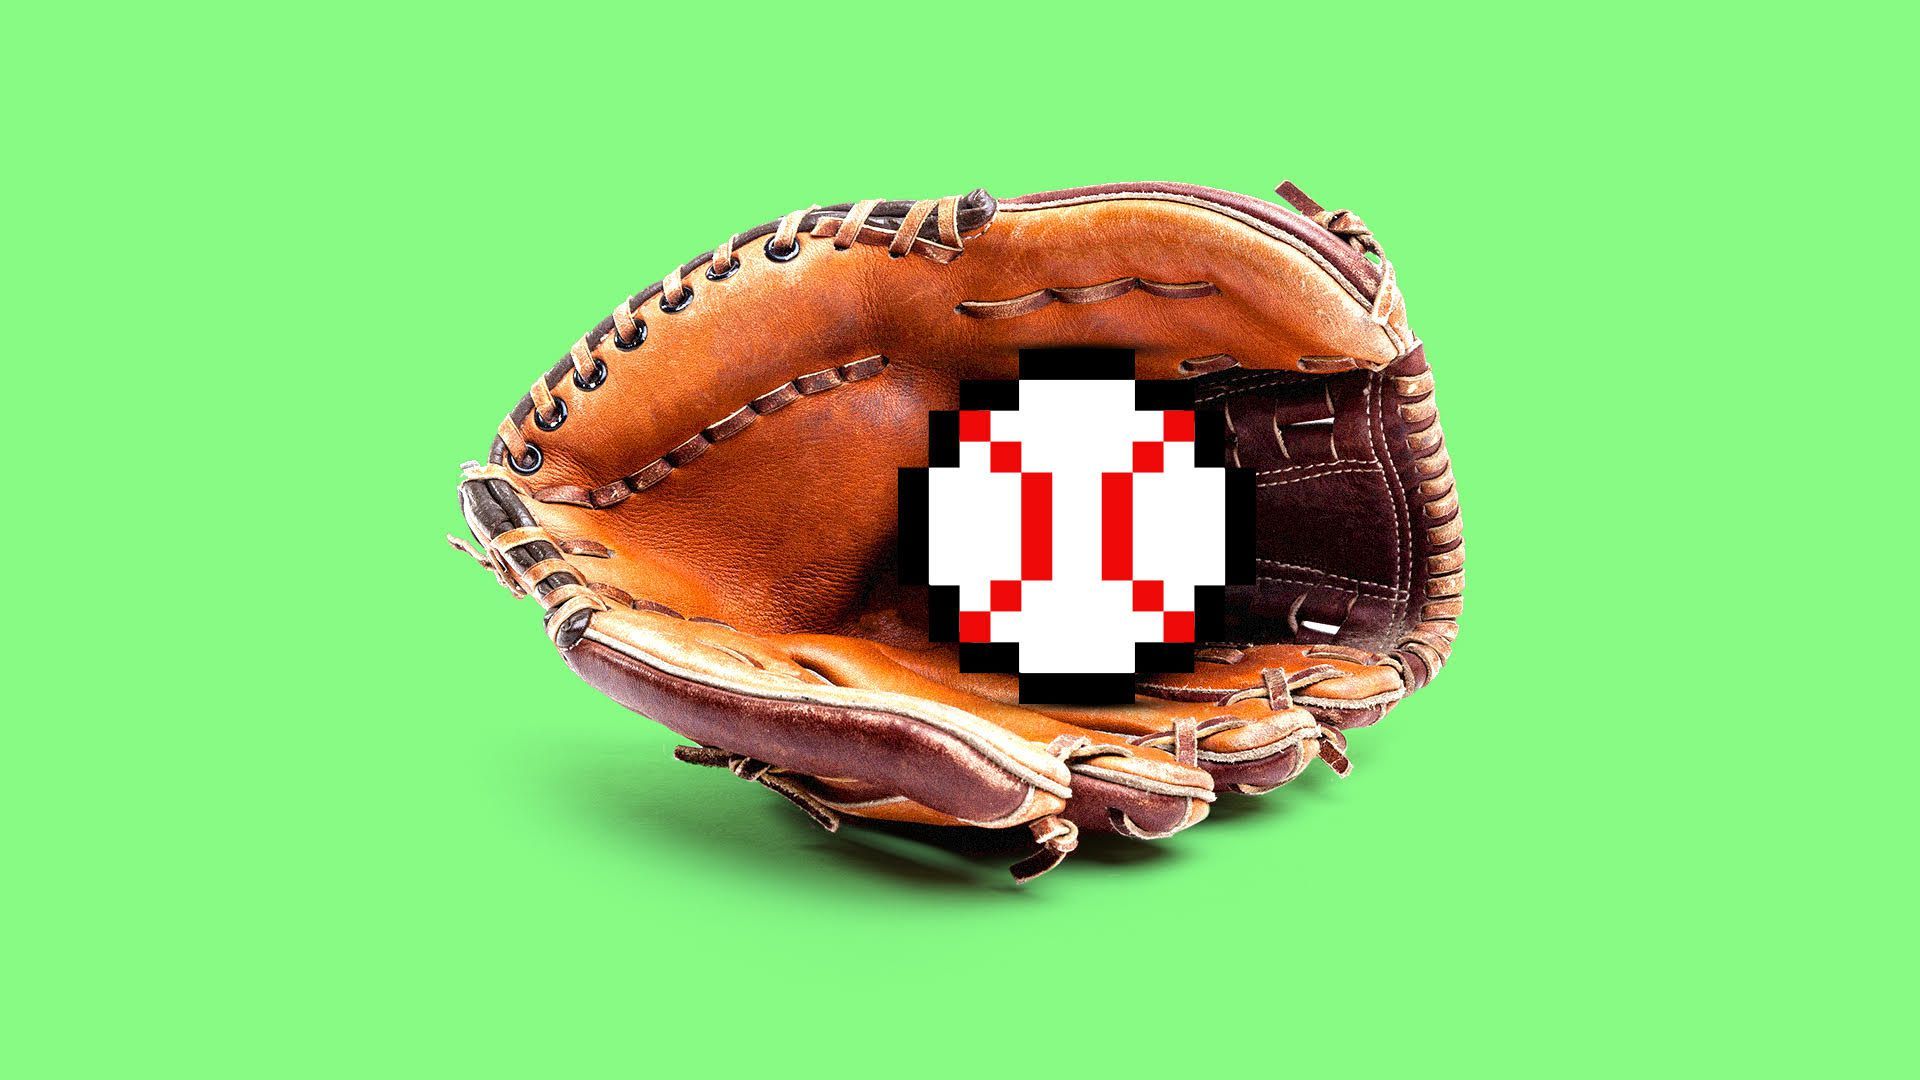 A baseball glove with a ball in it